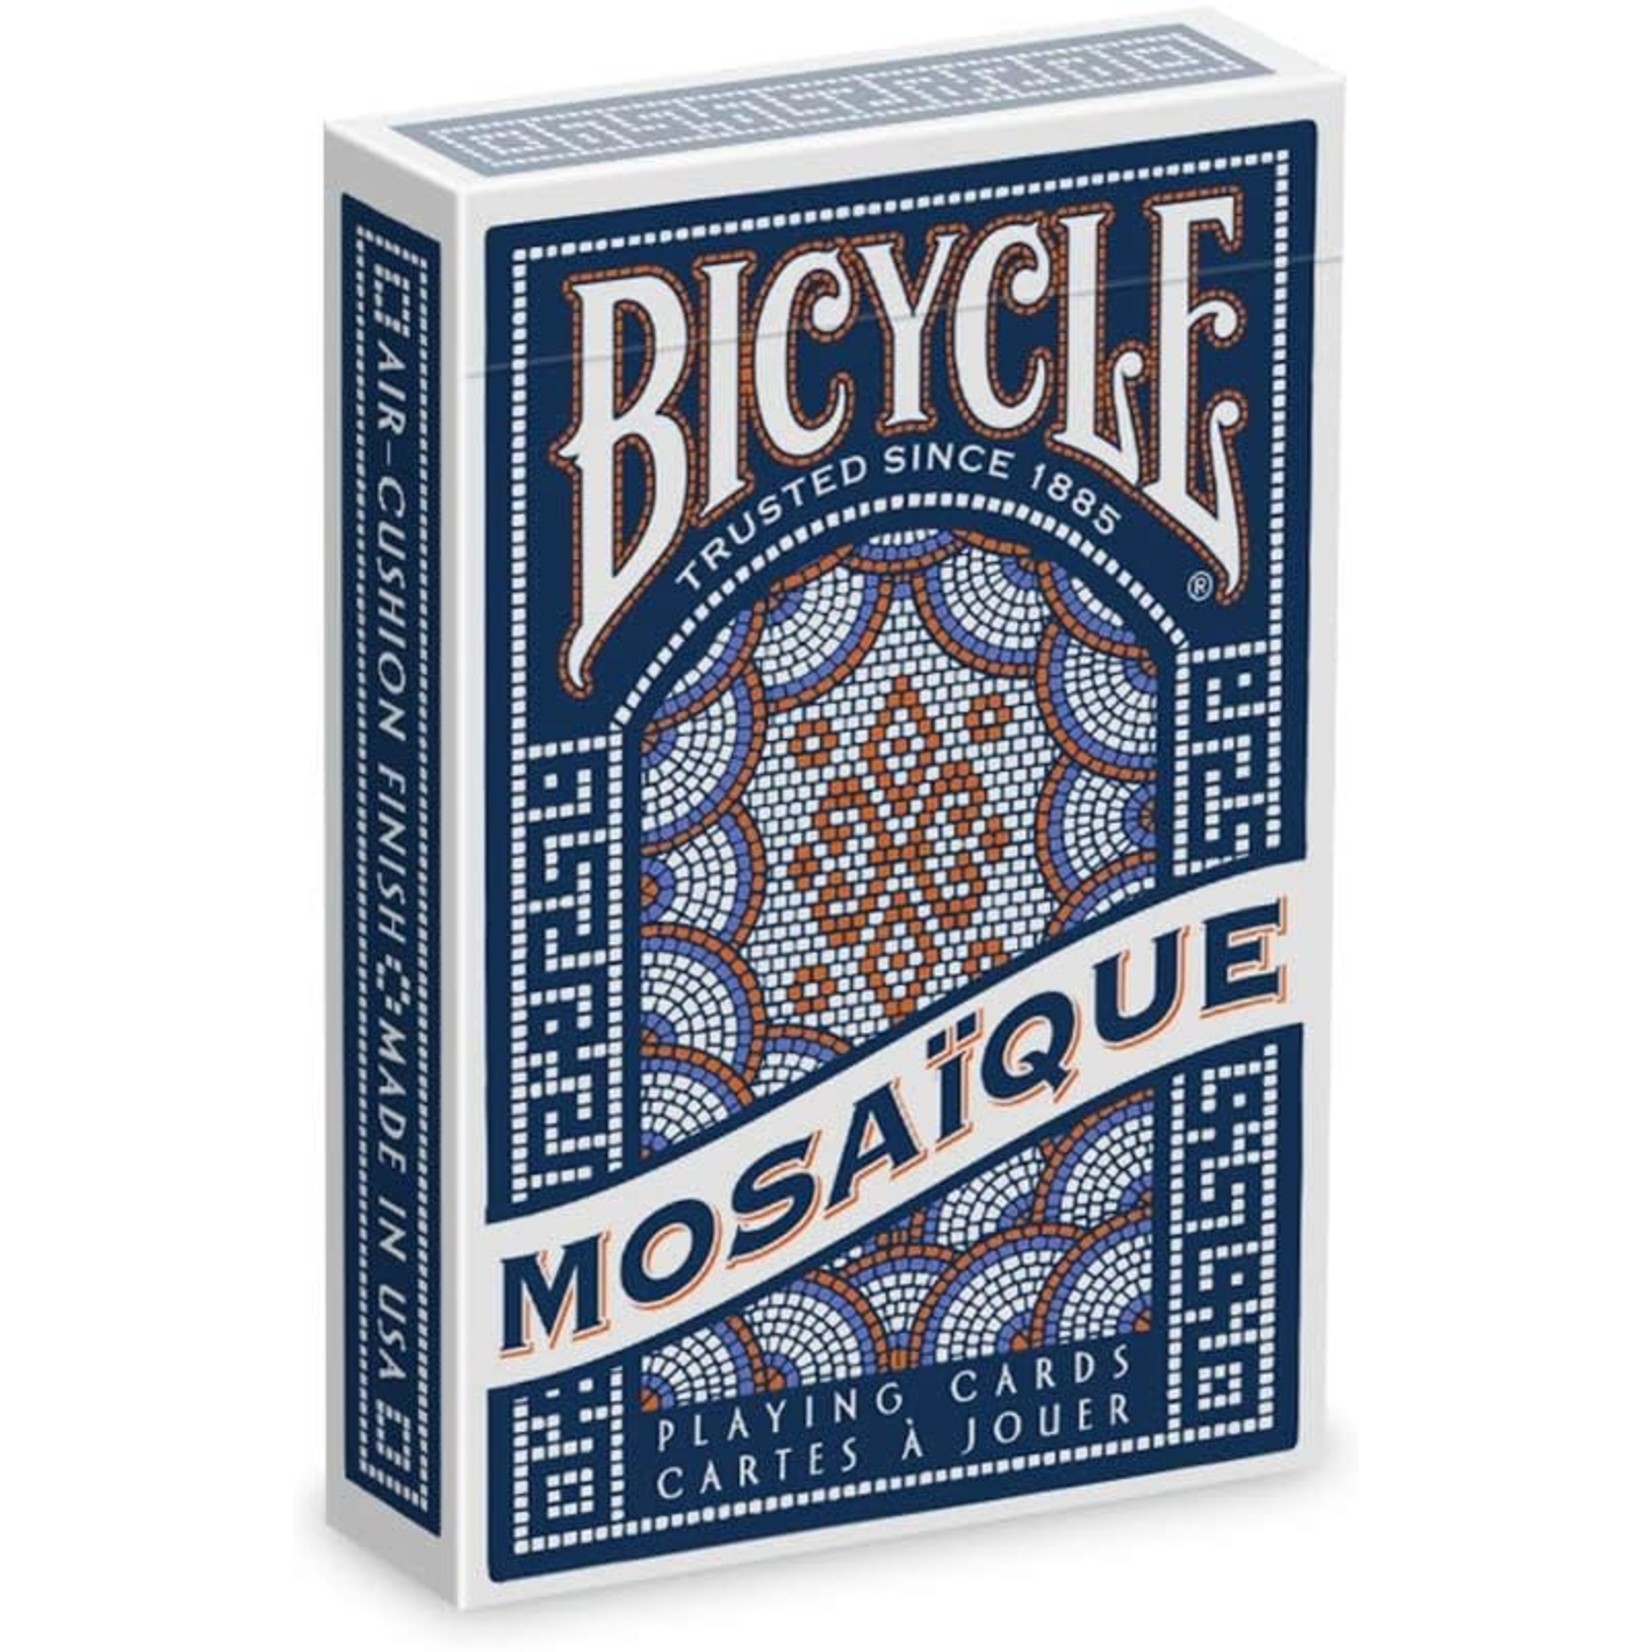 Bicycle Bicycle Playing Cards: Mosaique